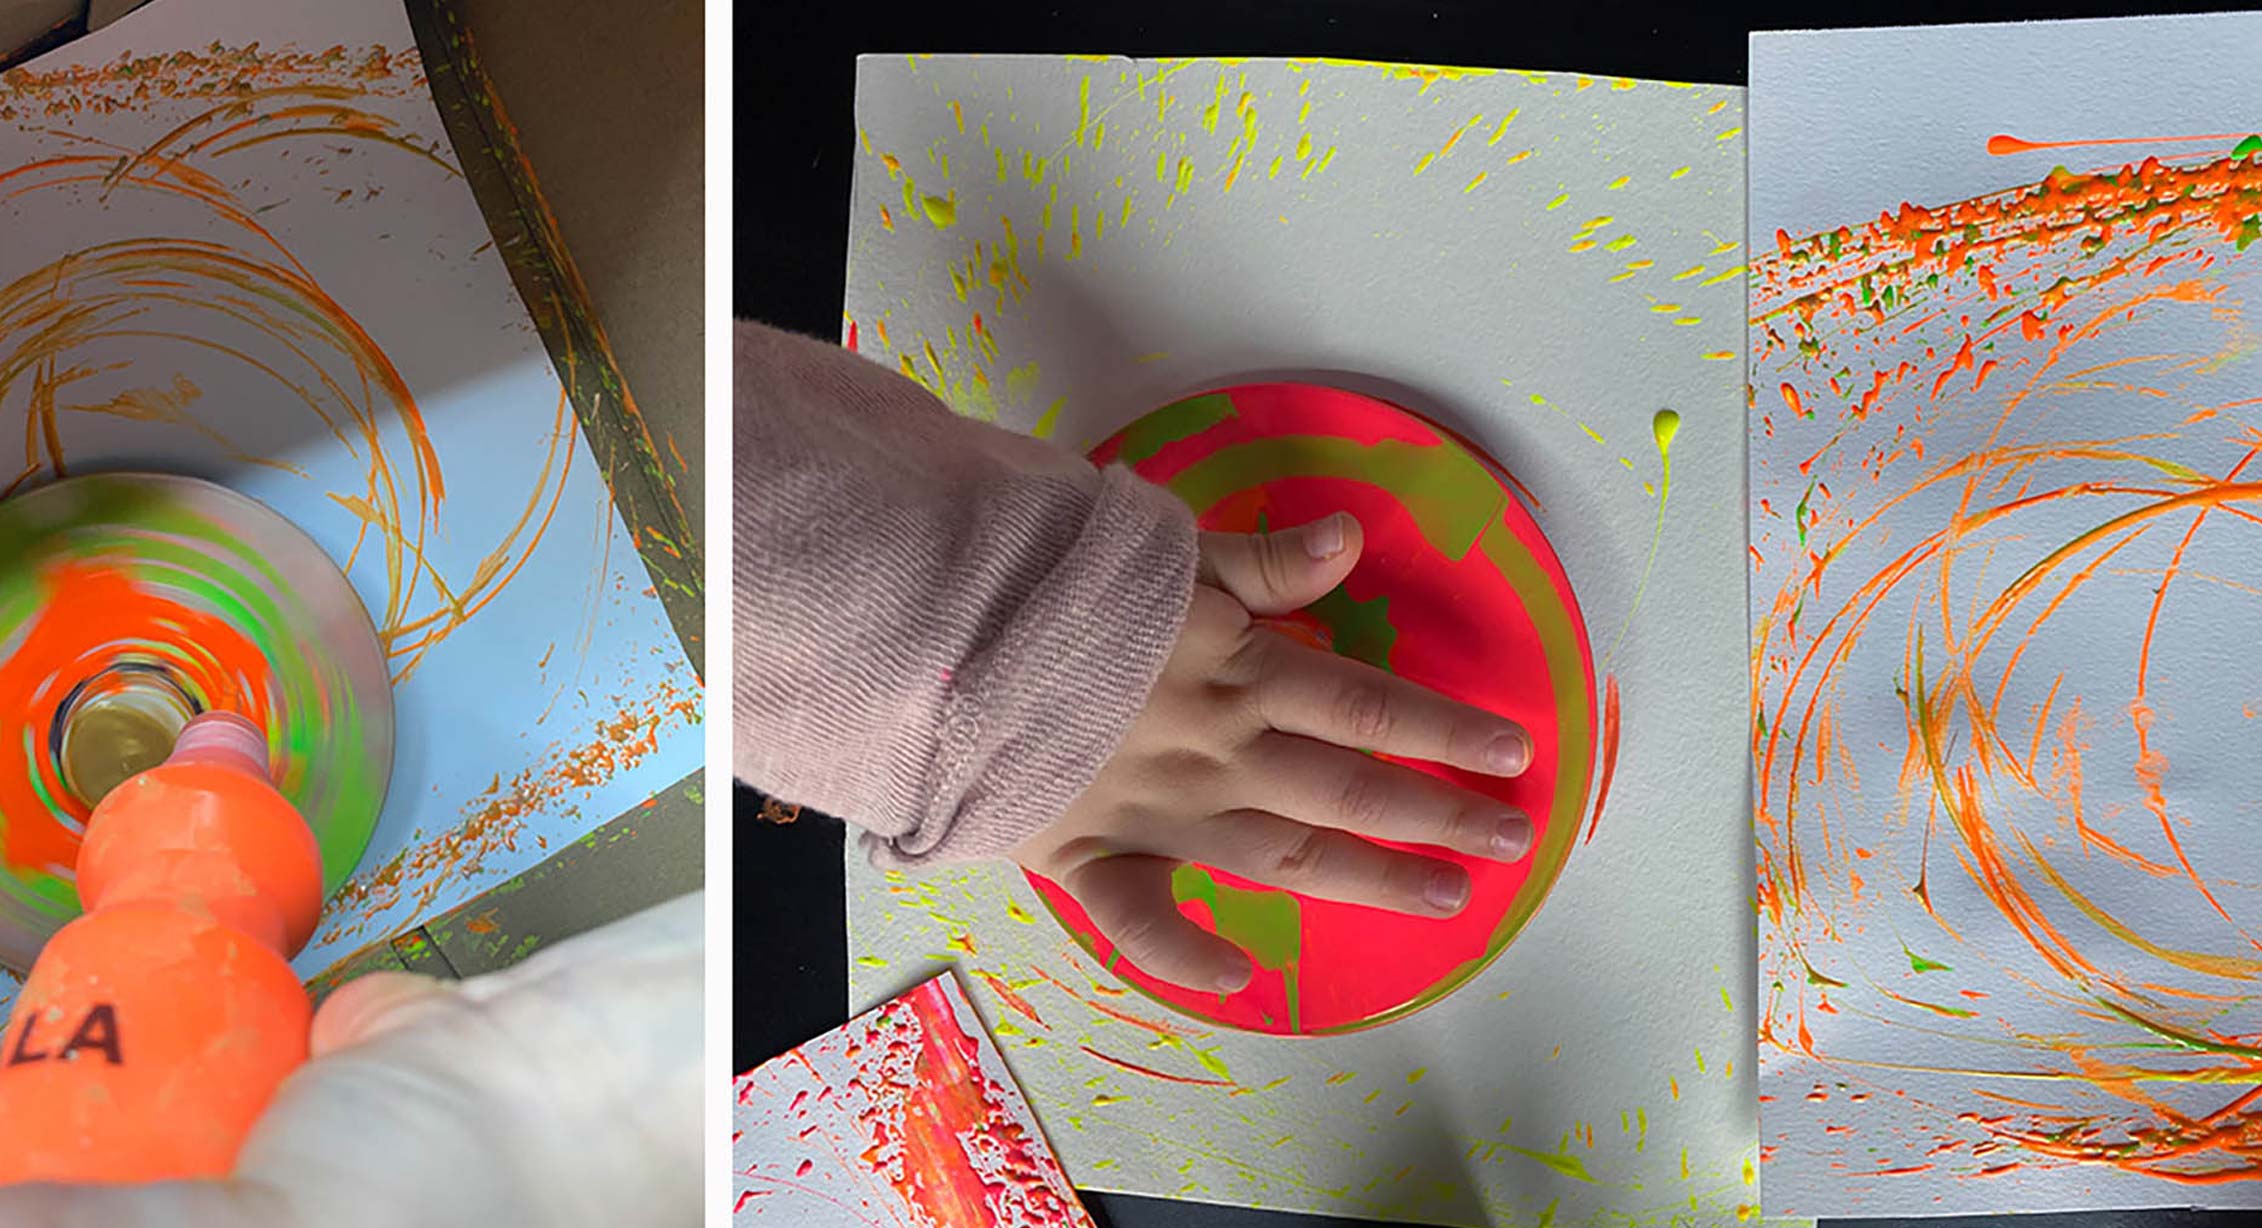 A child making spin art with repurposed objects